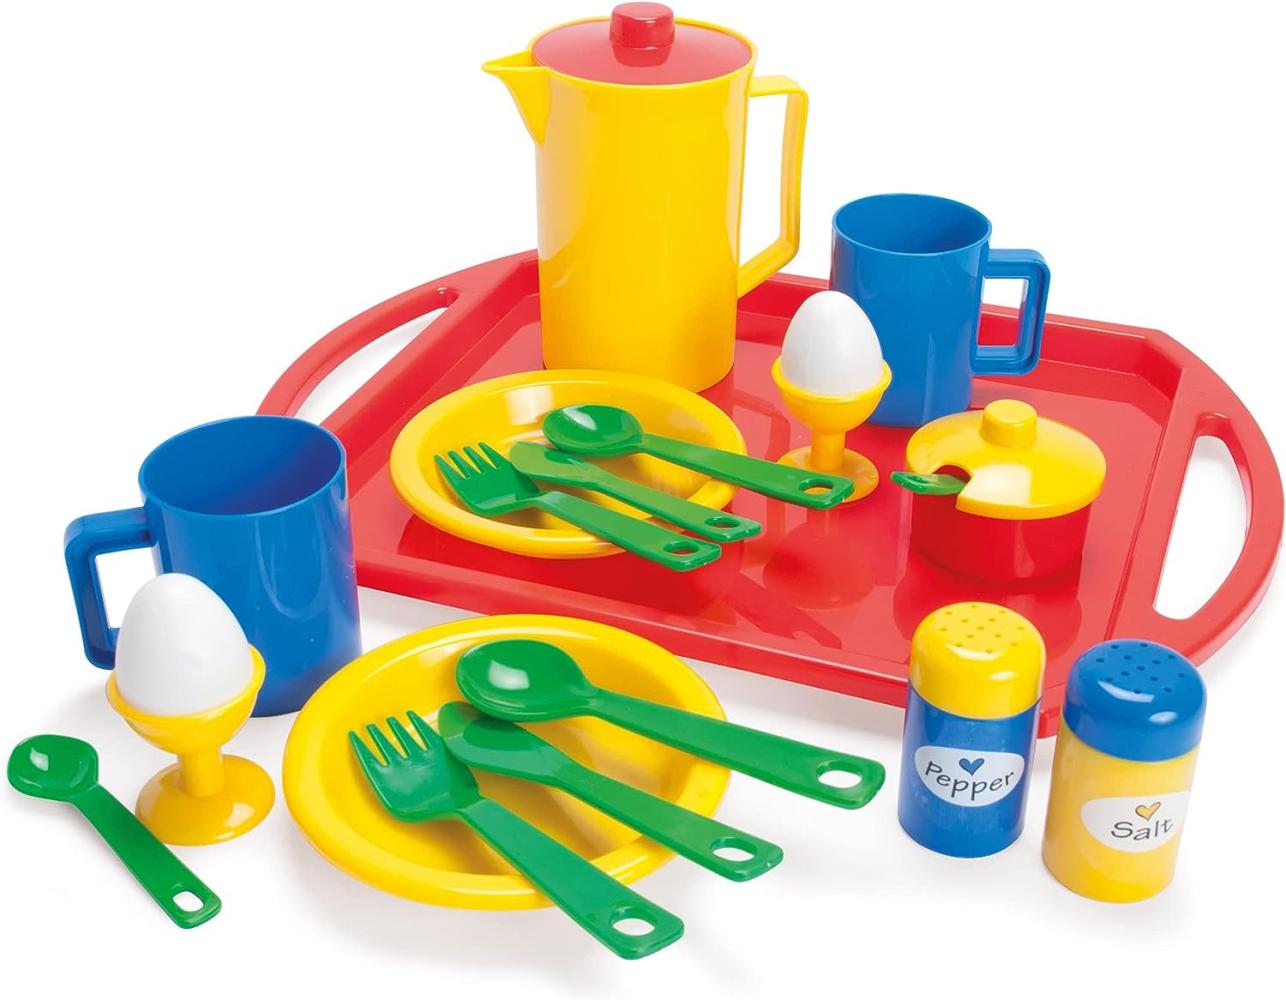 Dantoy Breakfast Set with Tray, Role Play Tea Set with 23 Pieces Pretend Play Toys for Kids – Multi-Colour Bild 1